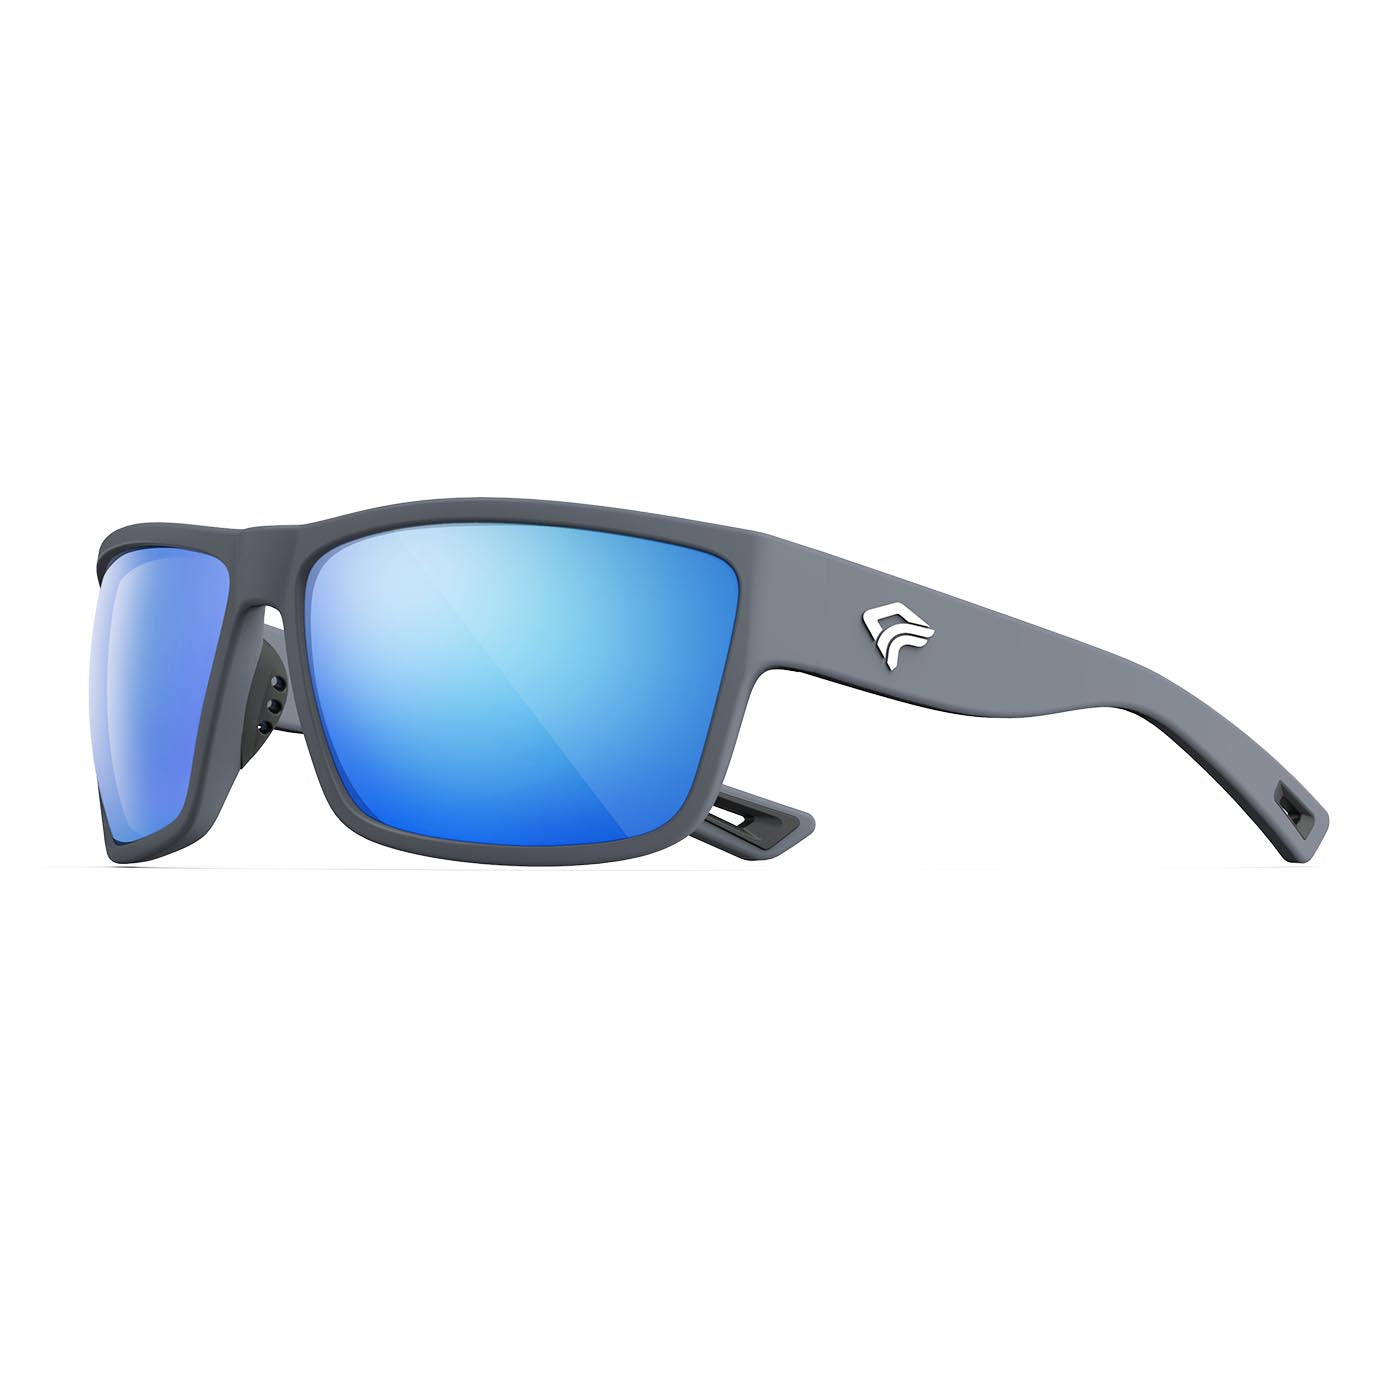 Flexible Polarized - Transparent and Sports Half Women To Cycling, Warranty Adjustable Ideal Pure - Frame and - Matte and Running, Ideal for Golf, Grey with for Sunglasses Lifetime - Men Fishing